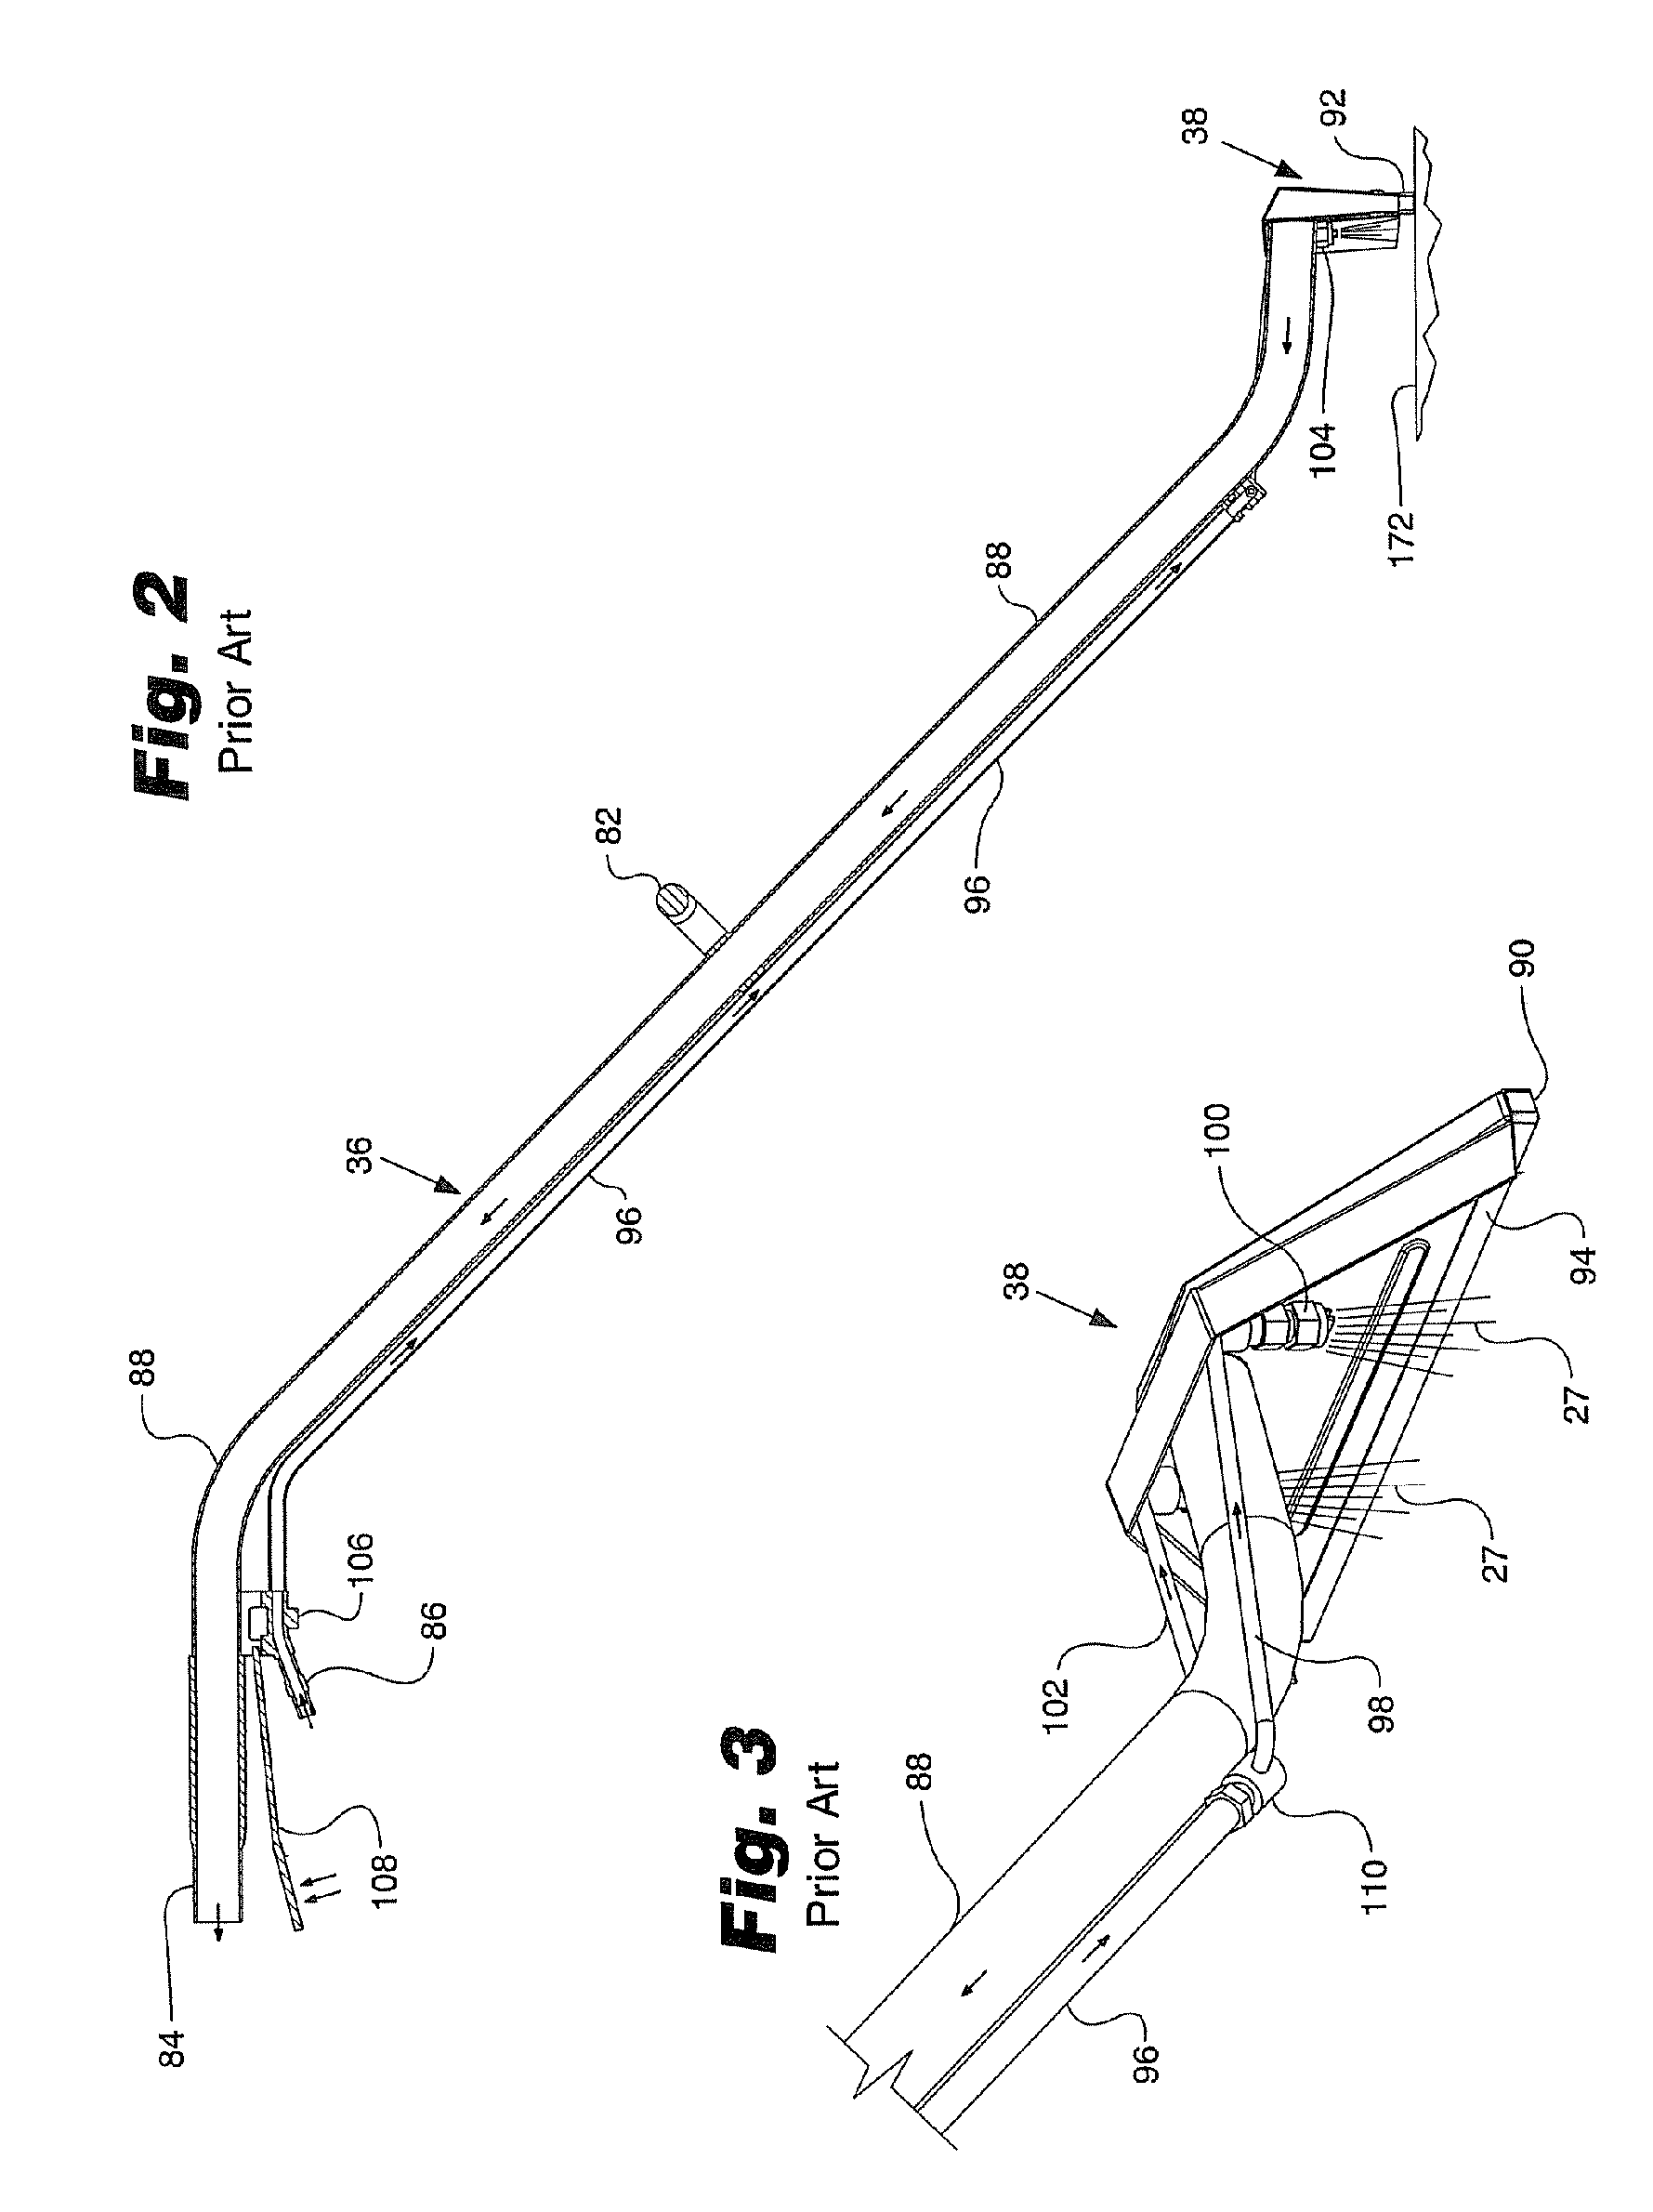 Dual purpose floor cleaning apparatus and method of use